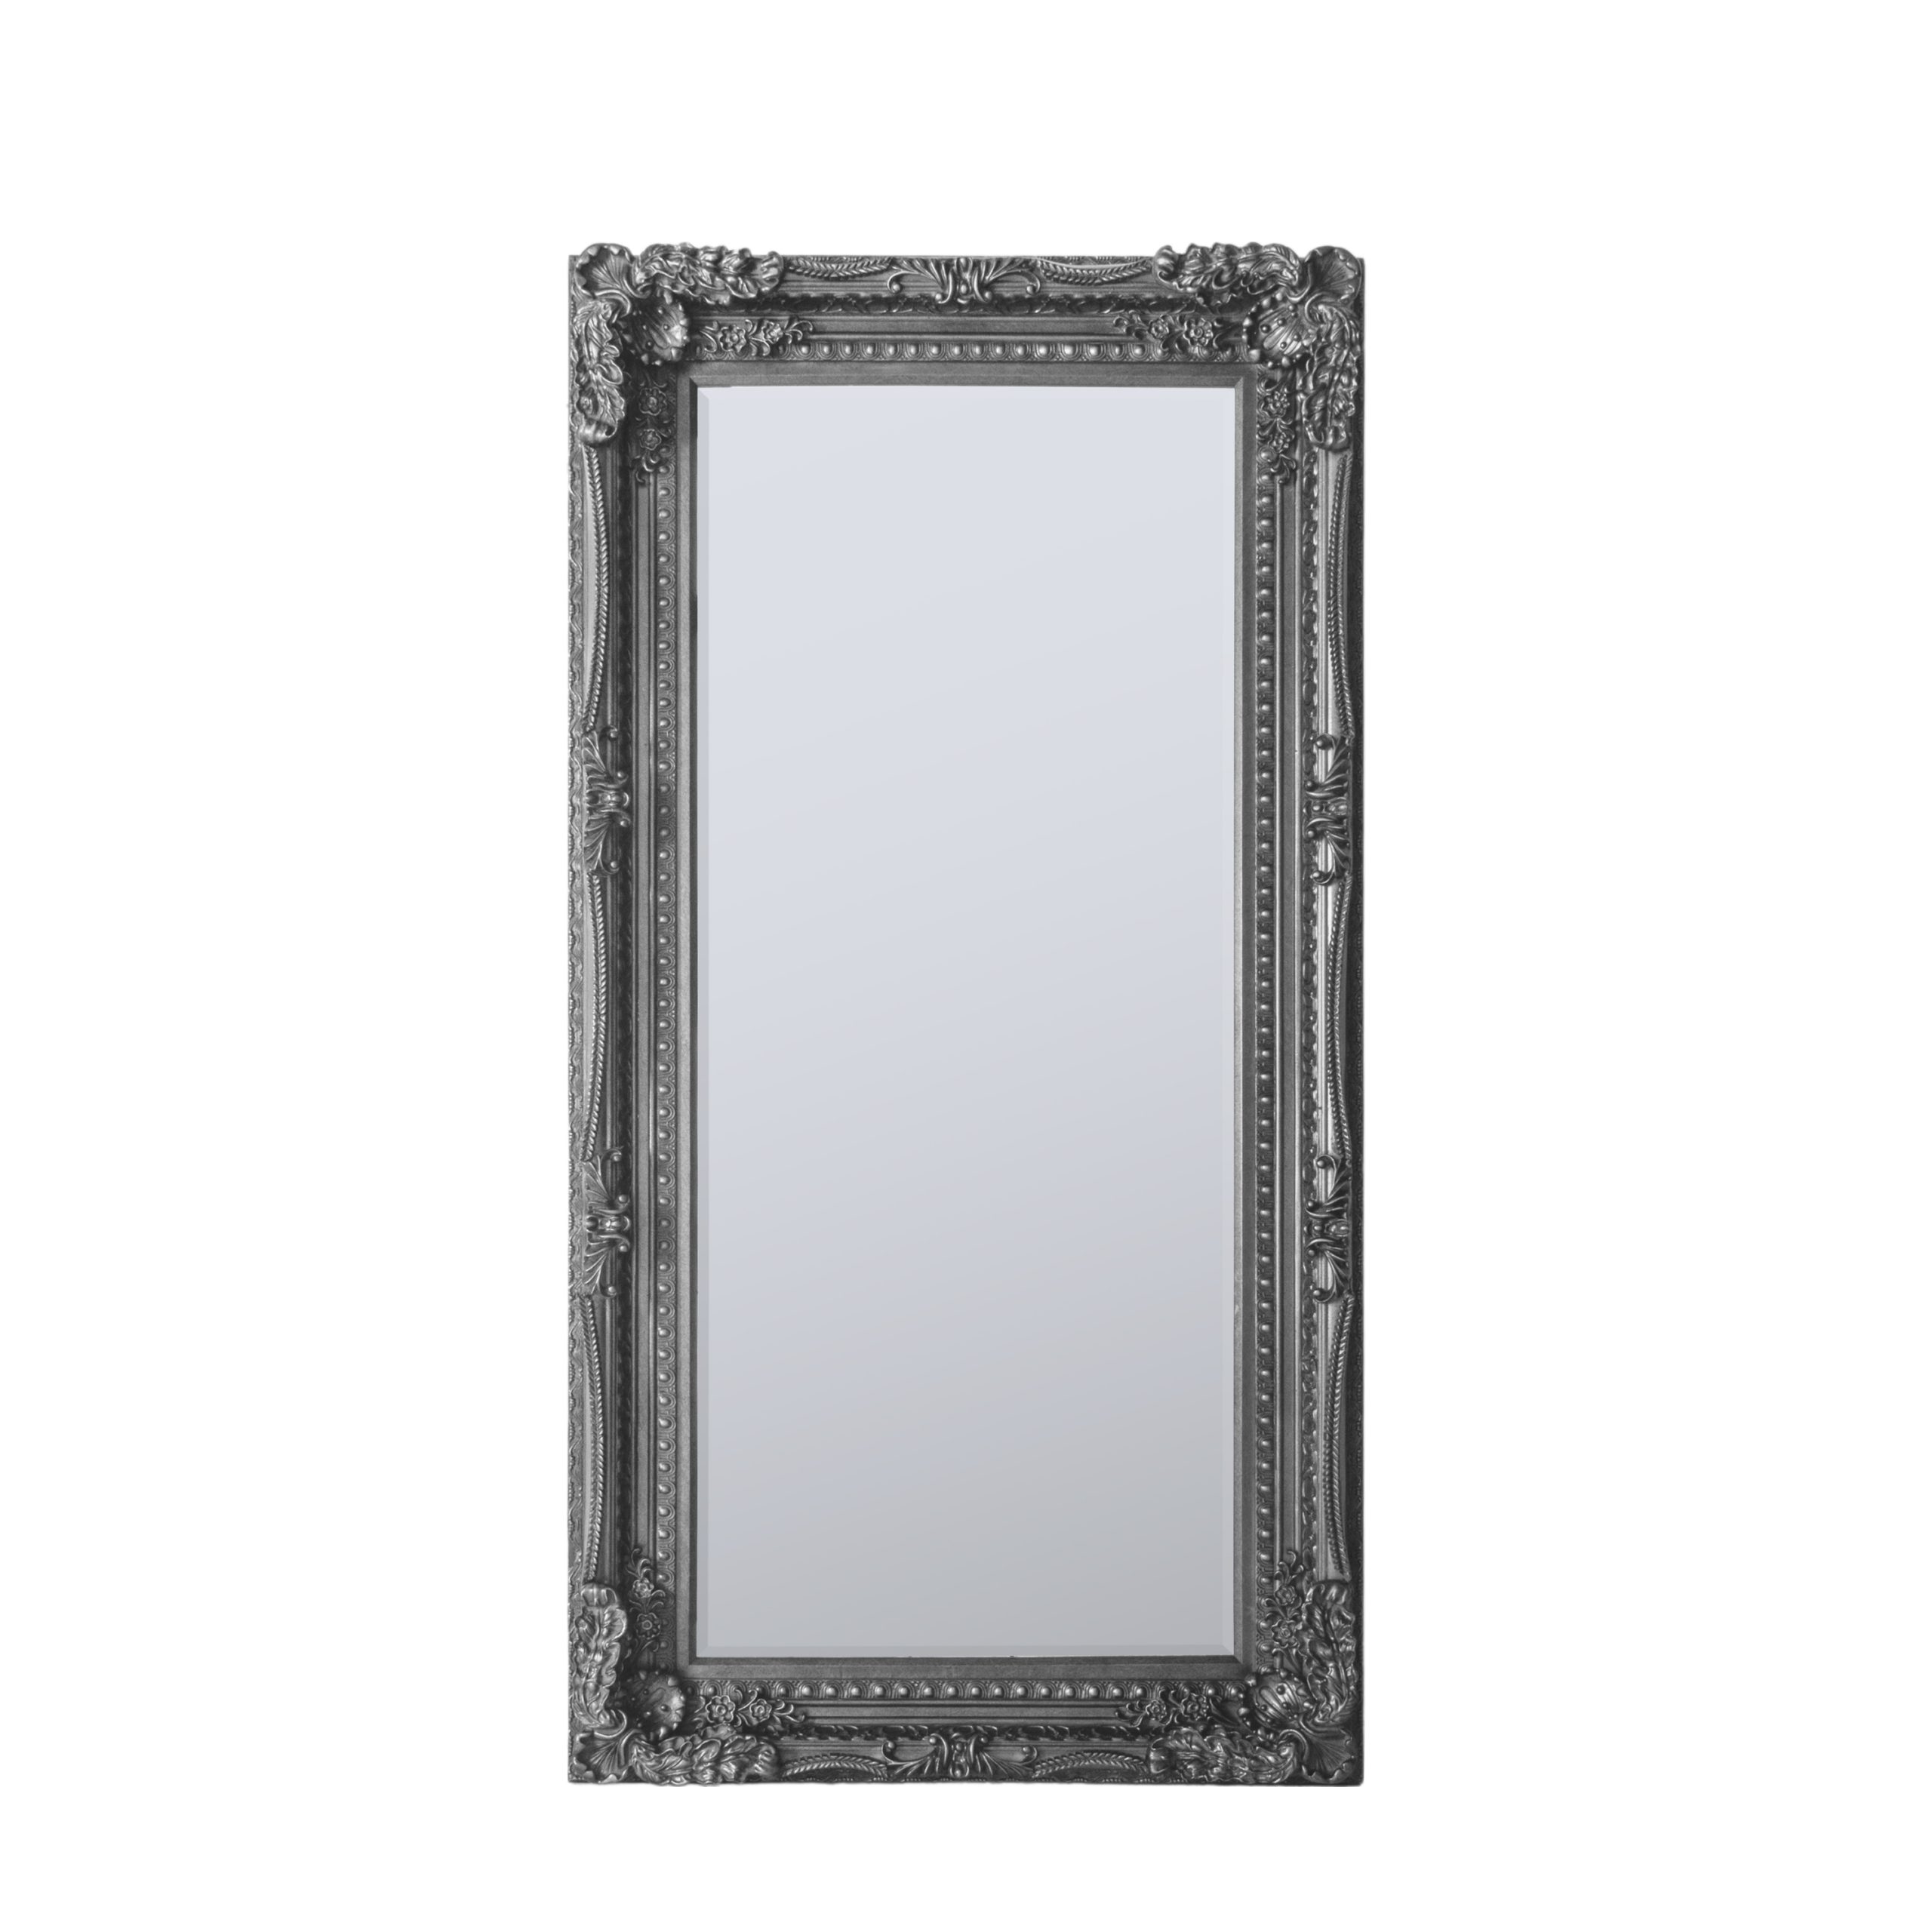 Gallery Direct Carved Louis Leaner Mirror Silver | Shackletons